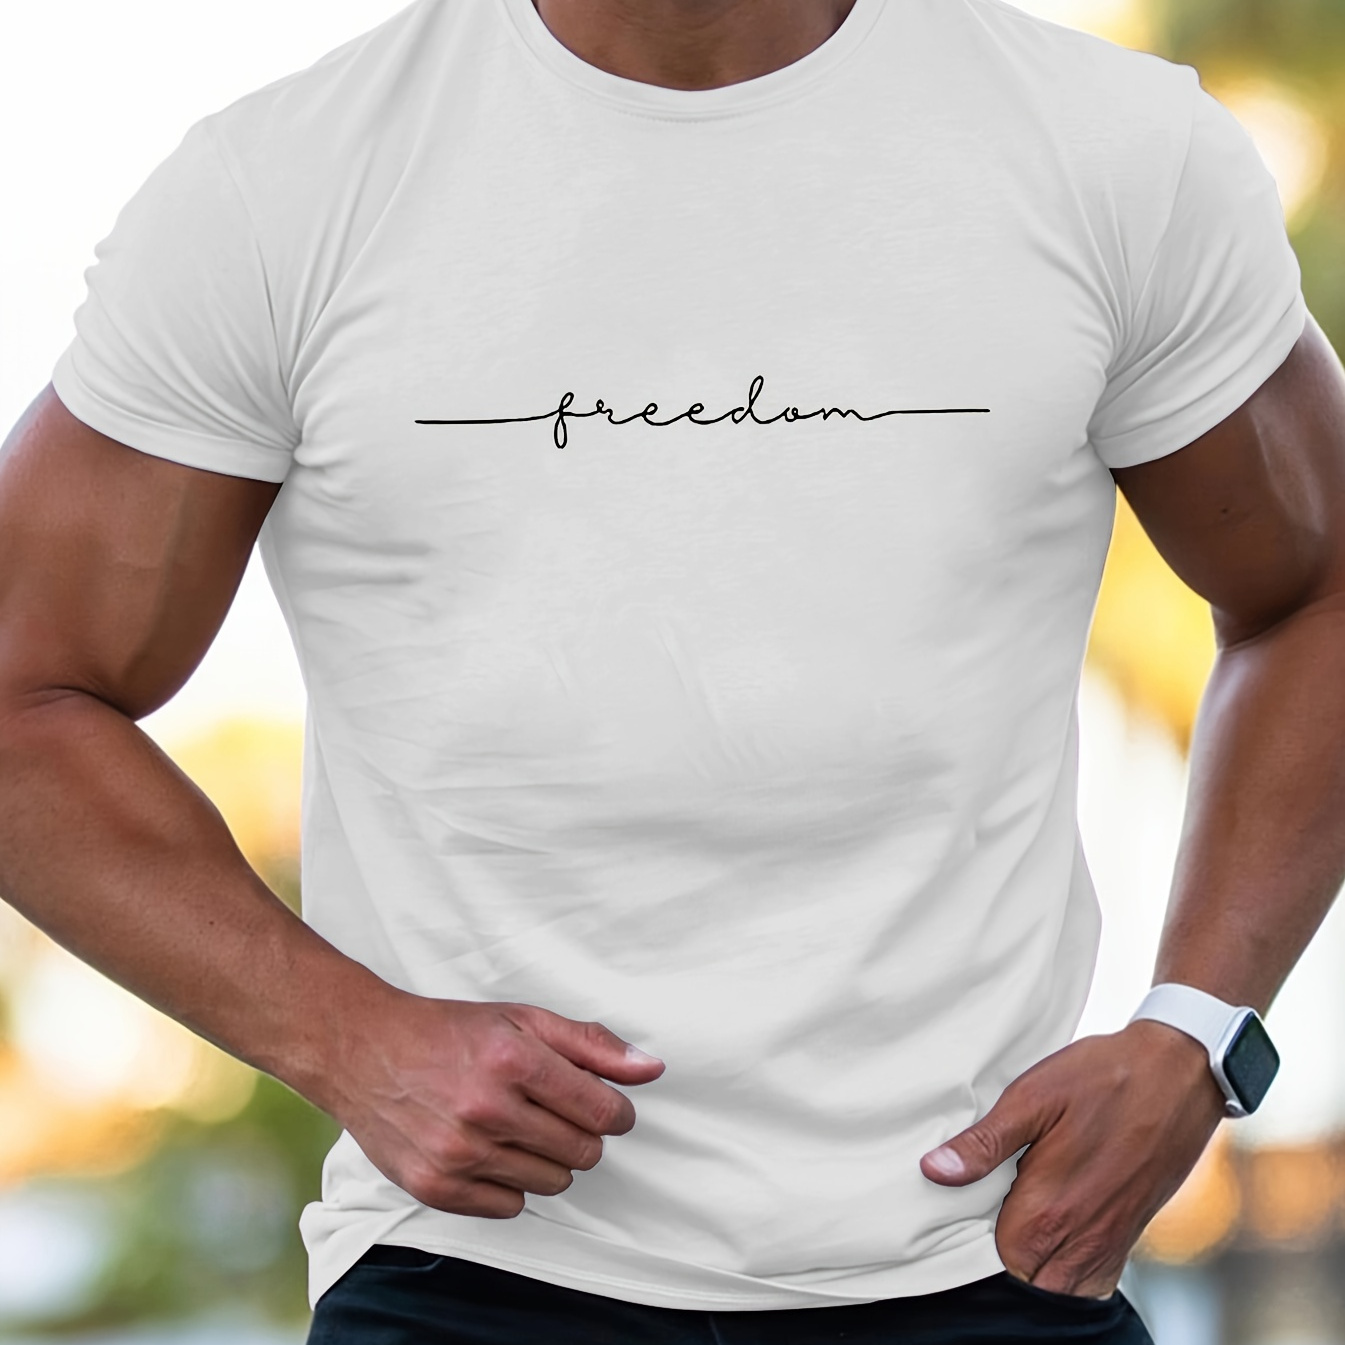 

Letter Graphic Men's Short Sleeve T-shirt, Comfy Stretchy Trendy Tees For Summer, Casual Daily Style Fashion Clothing